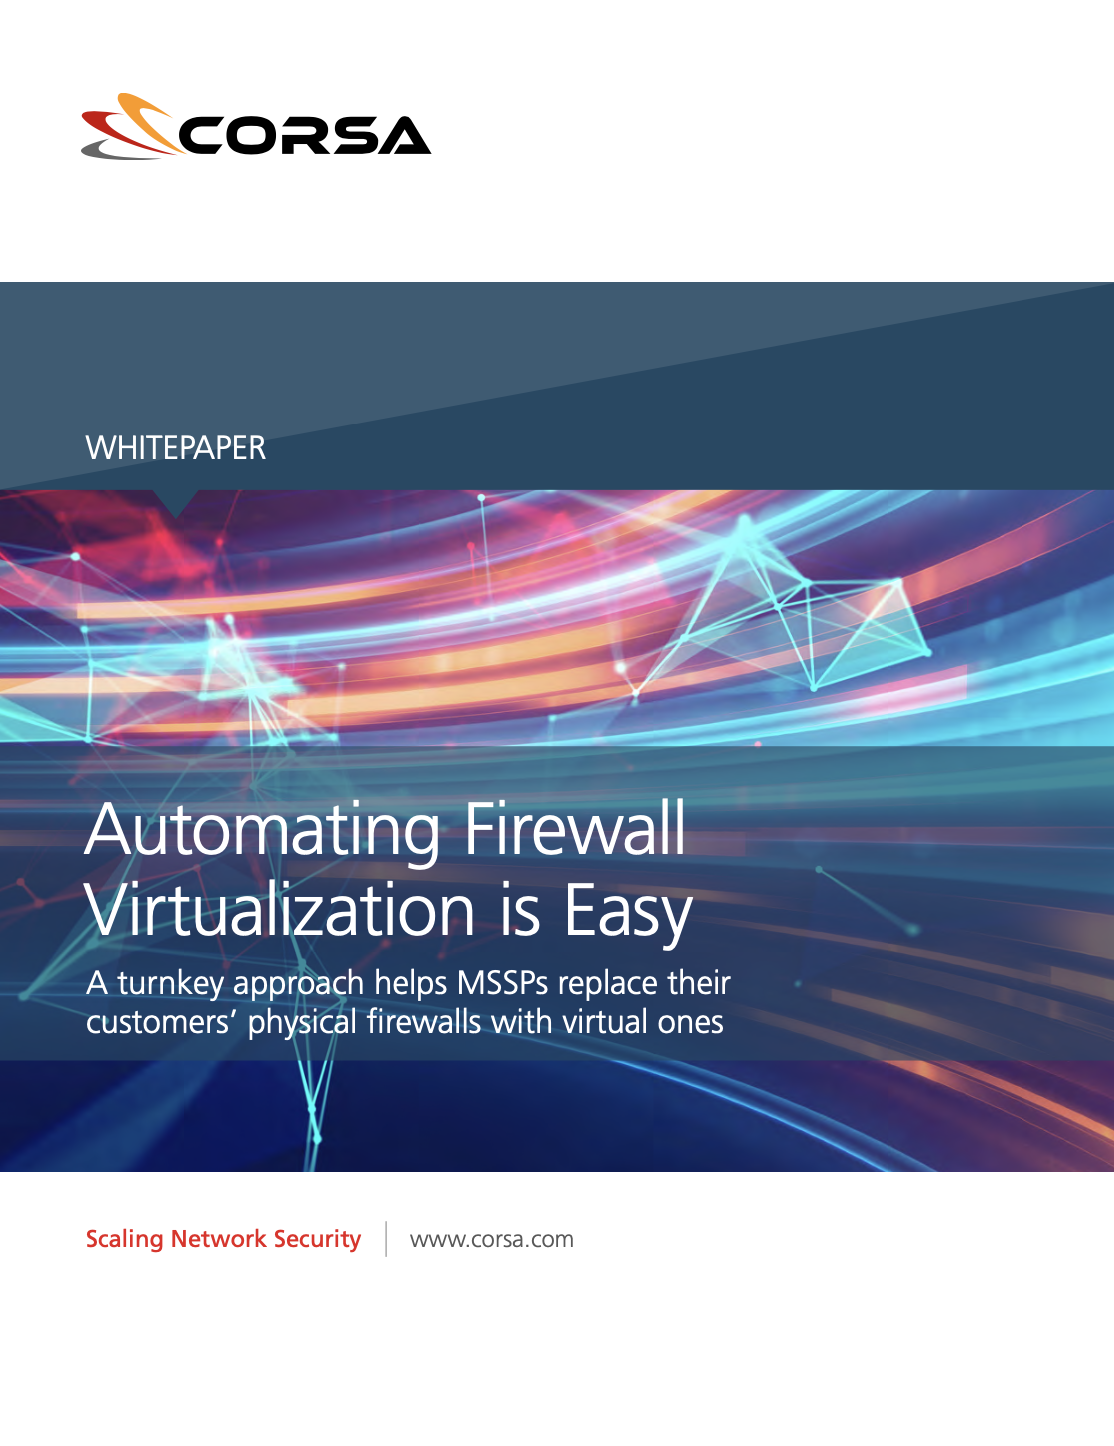 Corsa_WP-Automating_Firewall_Virtualization_is_Easy_cover_big